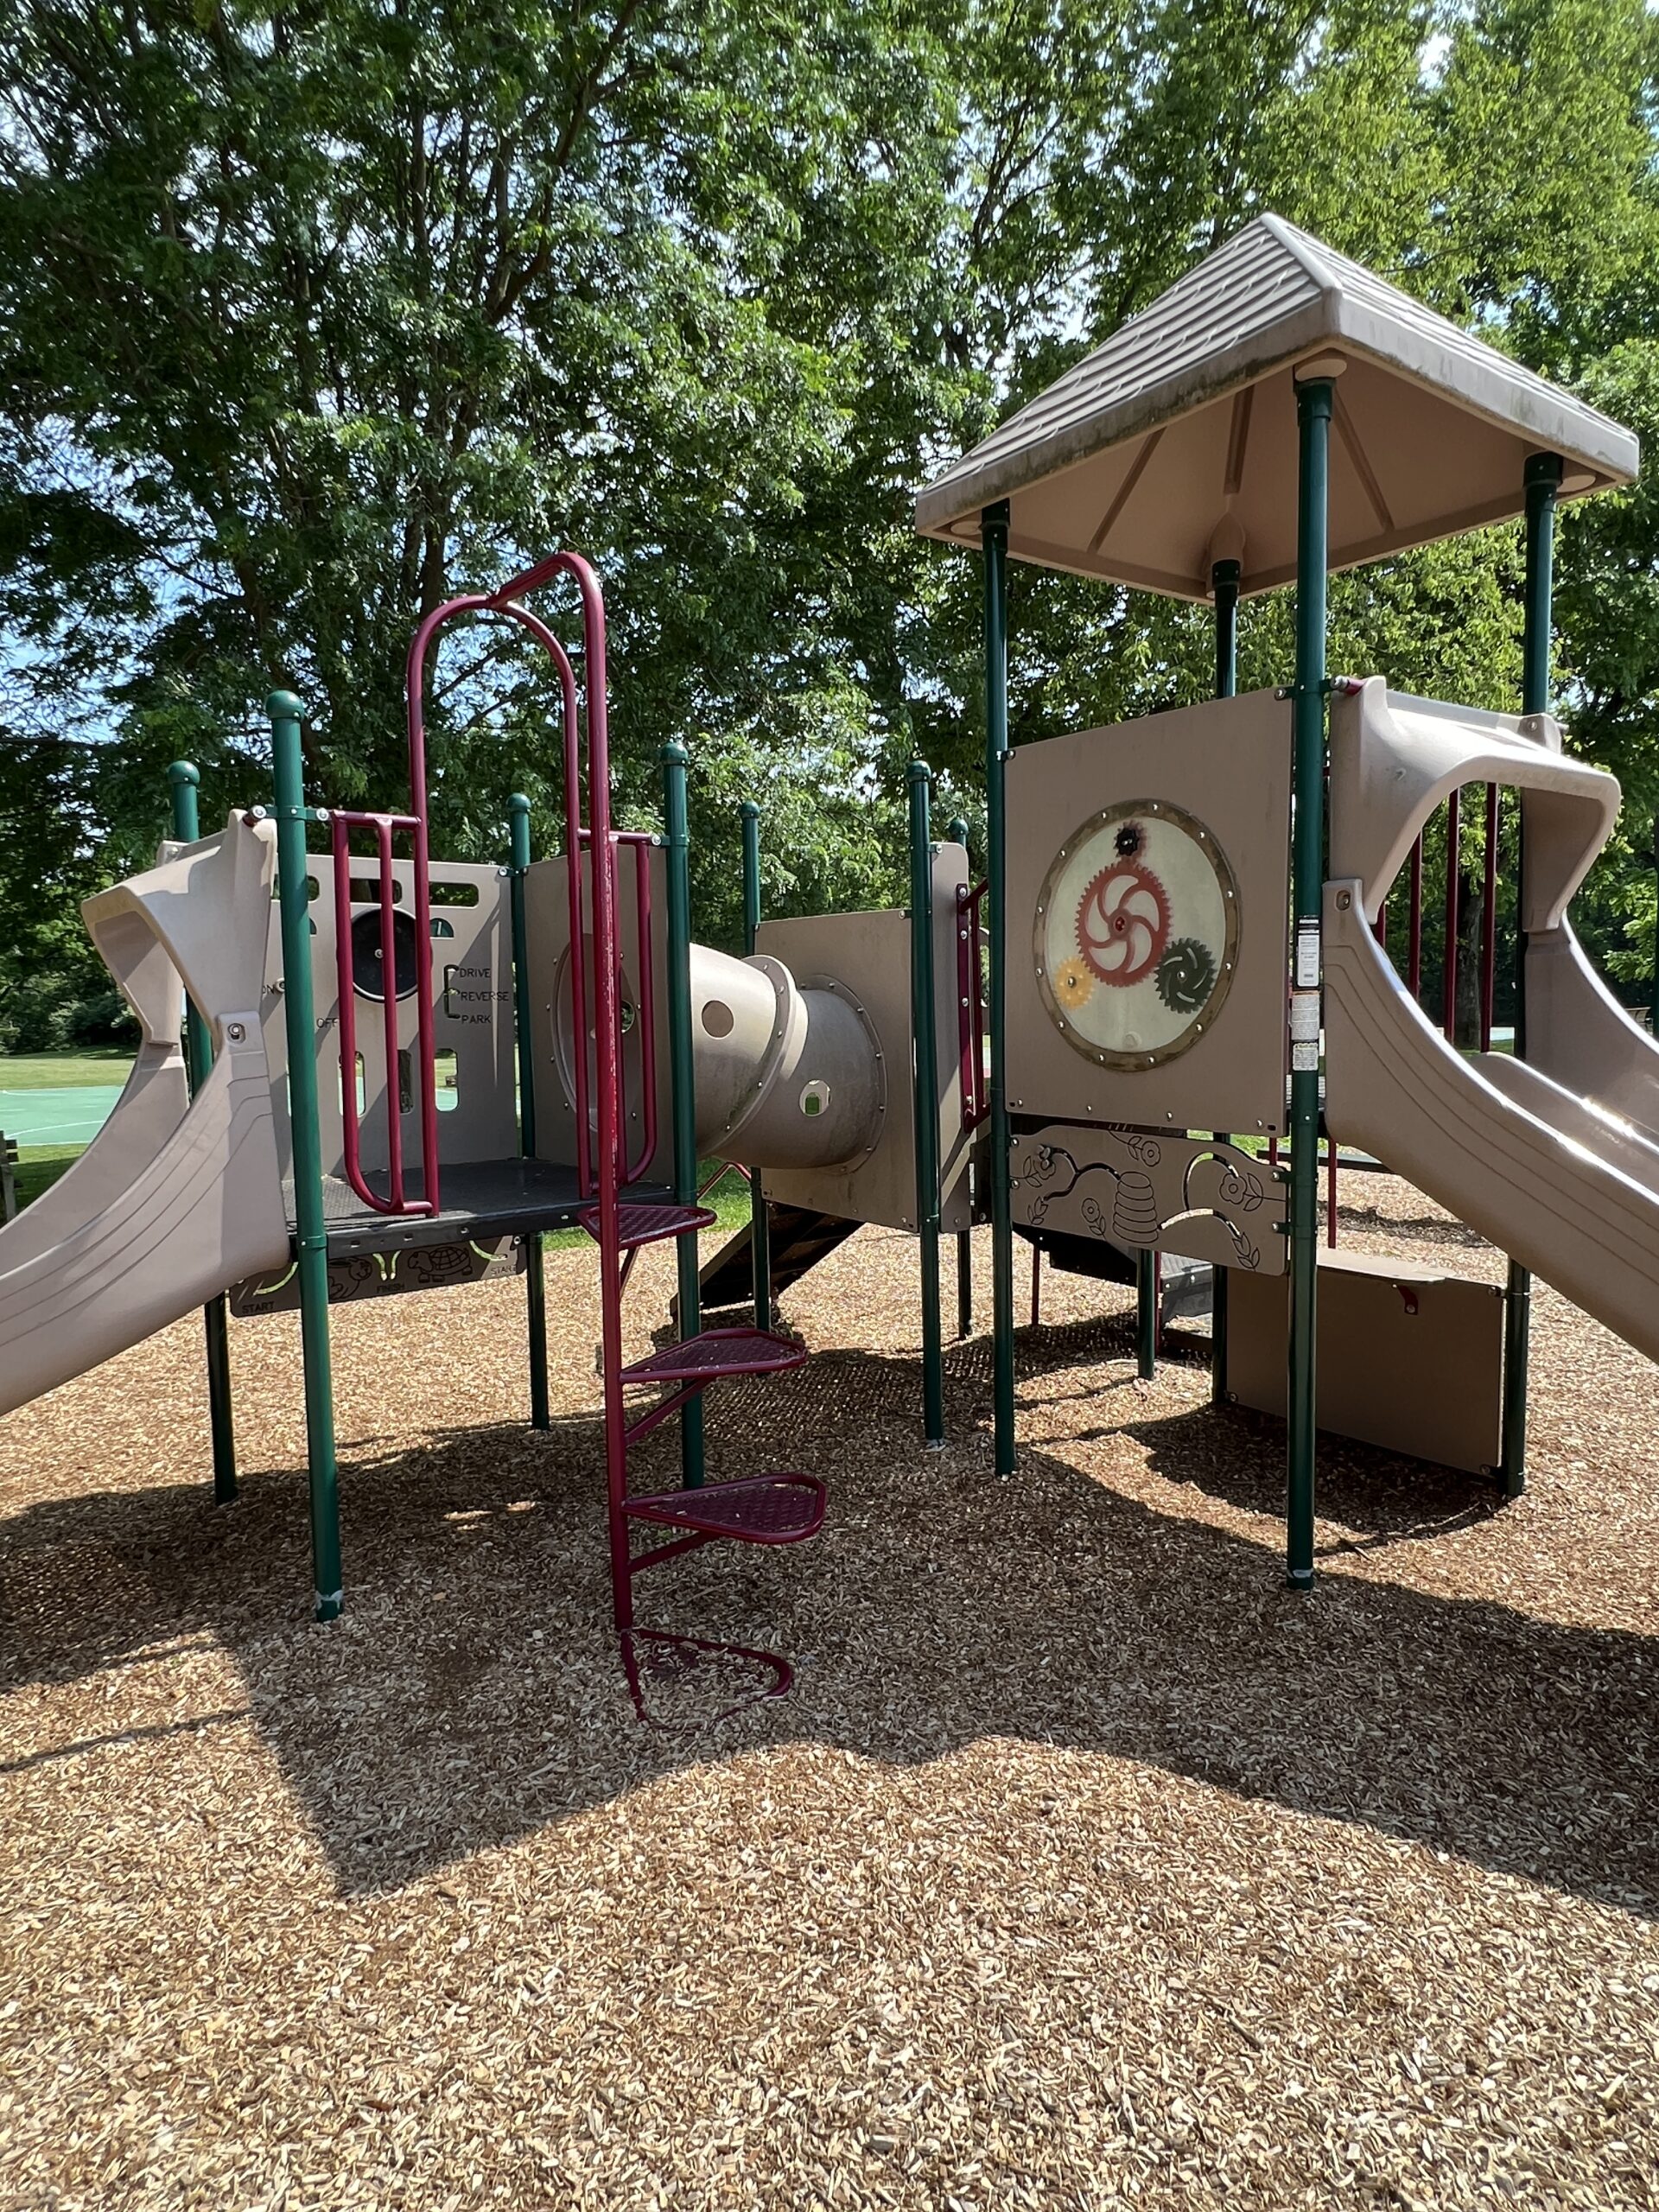 Green Acres Field of Dreams Playground in Independence Township NJ - Features - Tot Lot tunnel, sensory play, ladder, TALL image